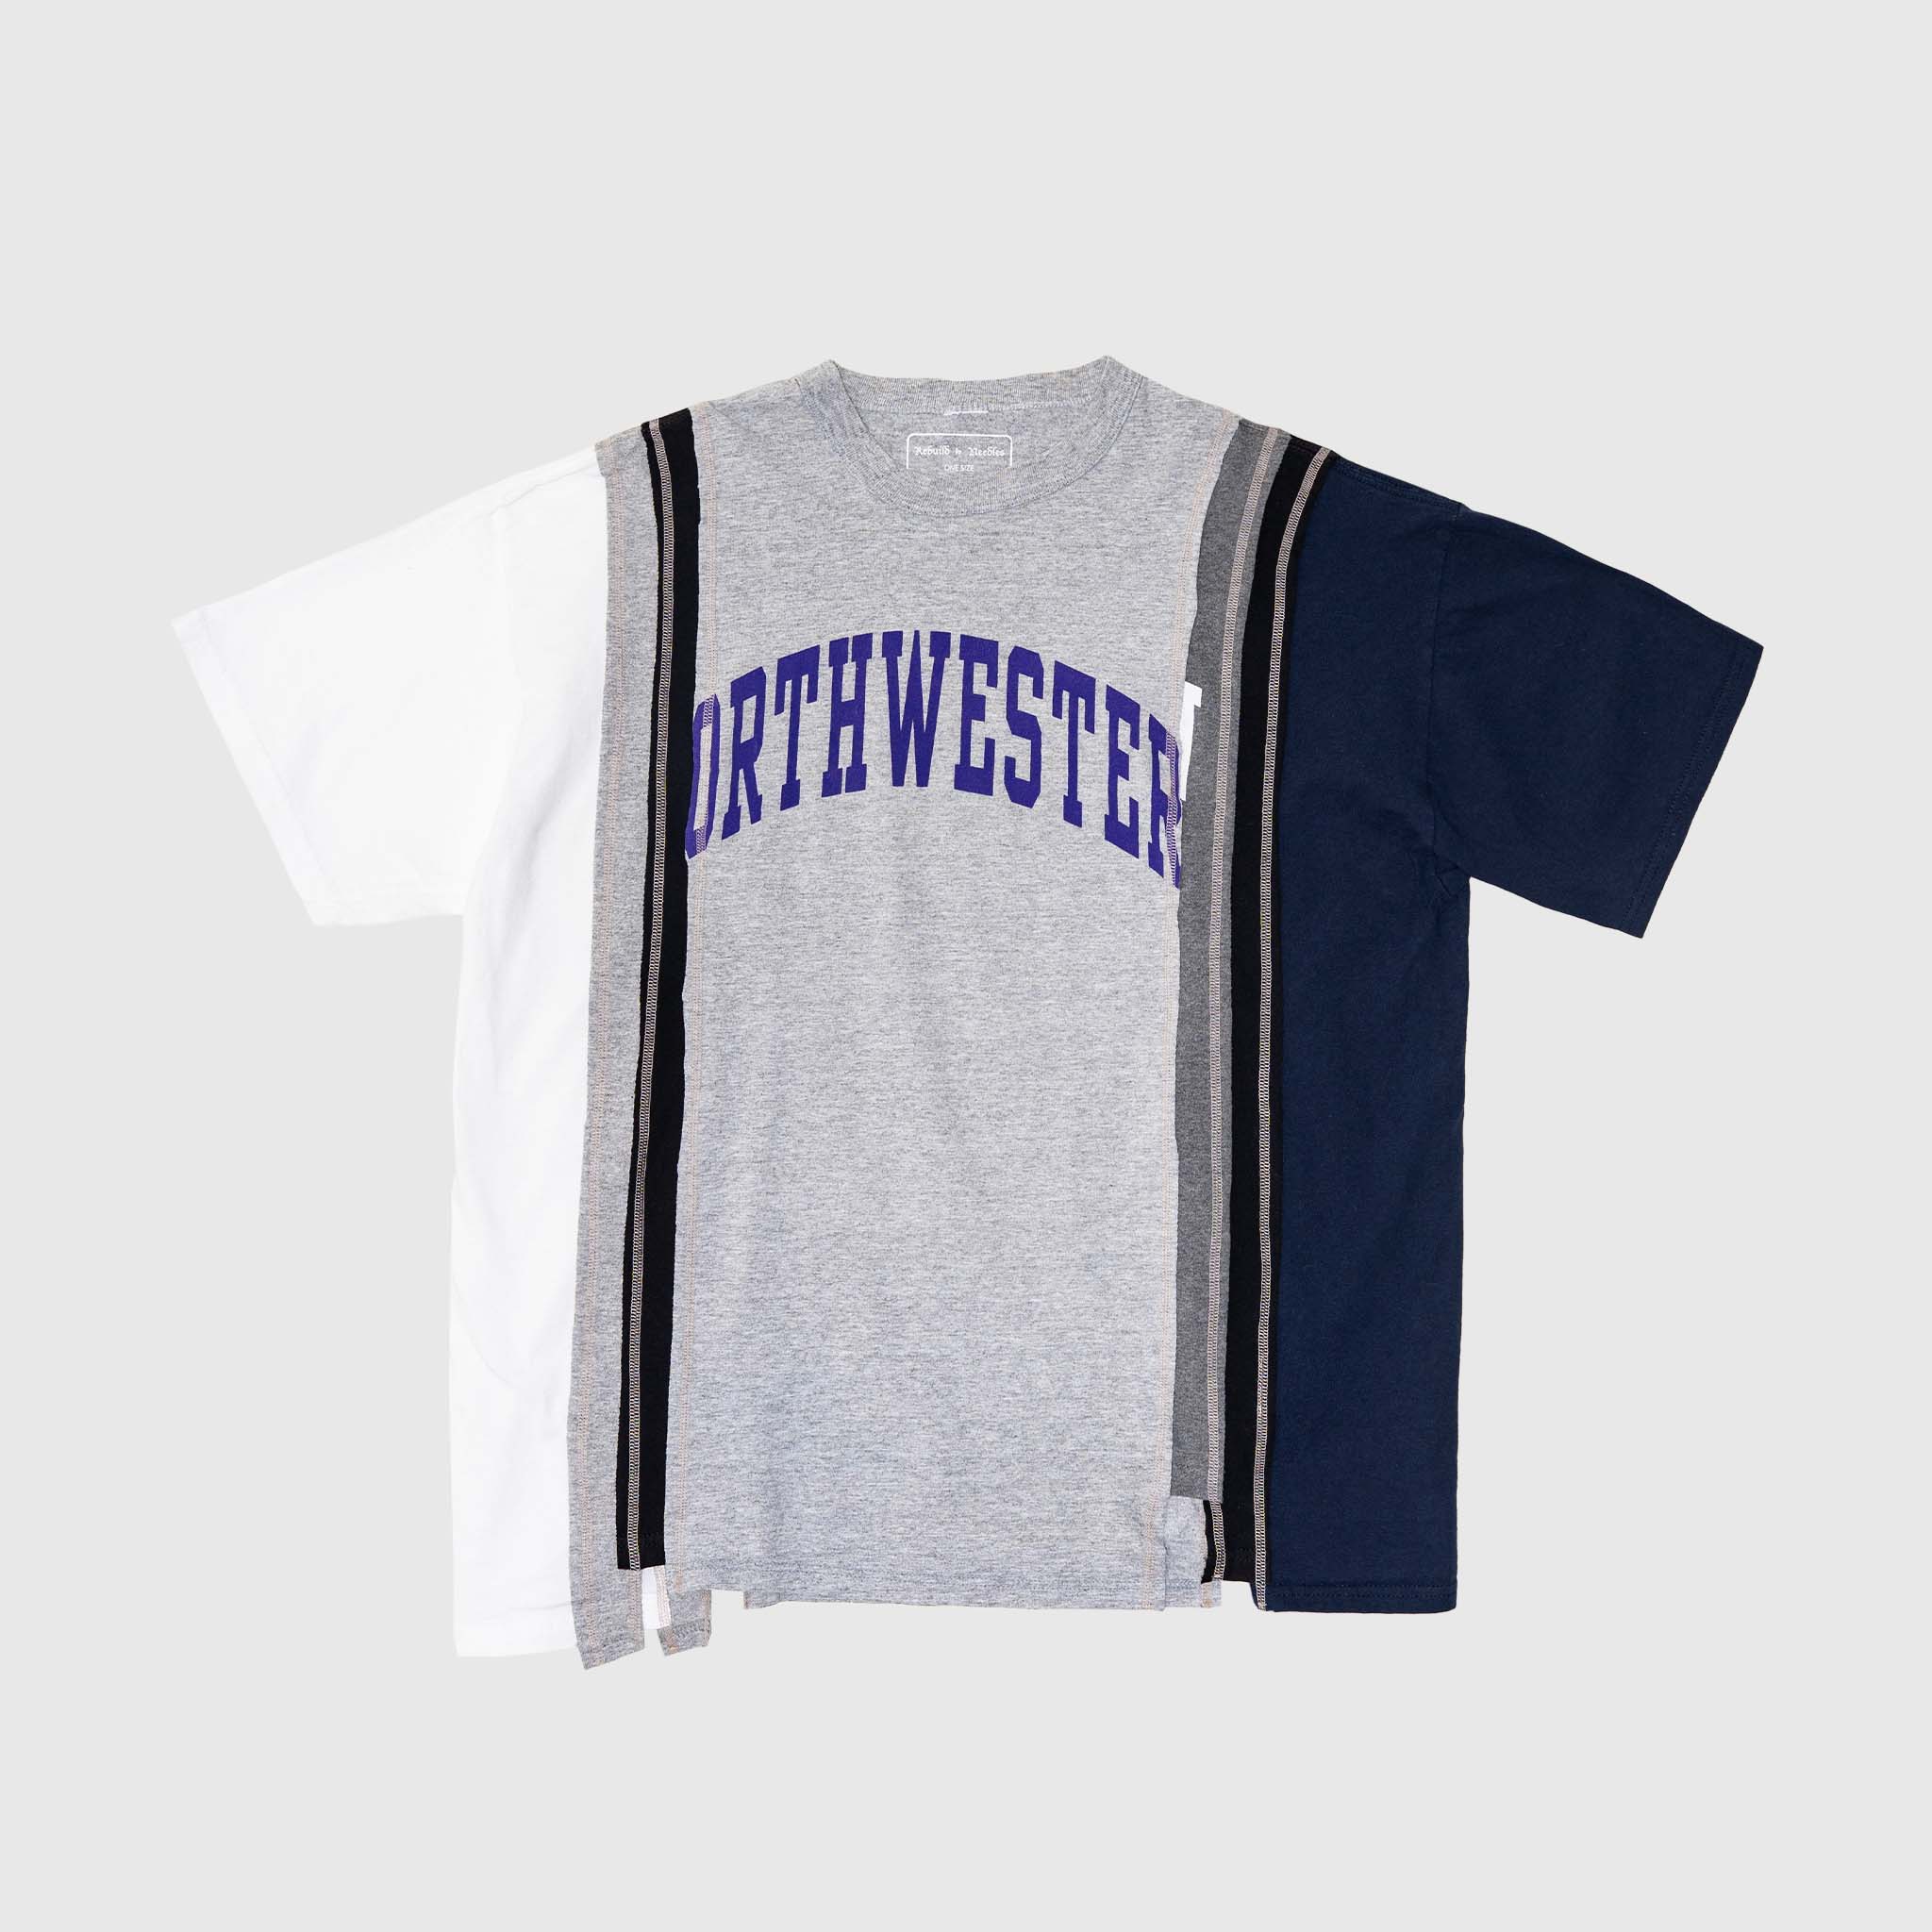 REBUILD BY NEEDLES 7 CUTS WIDE COLLEGE T-SHIRT